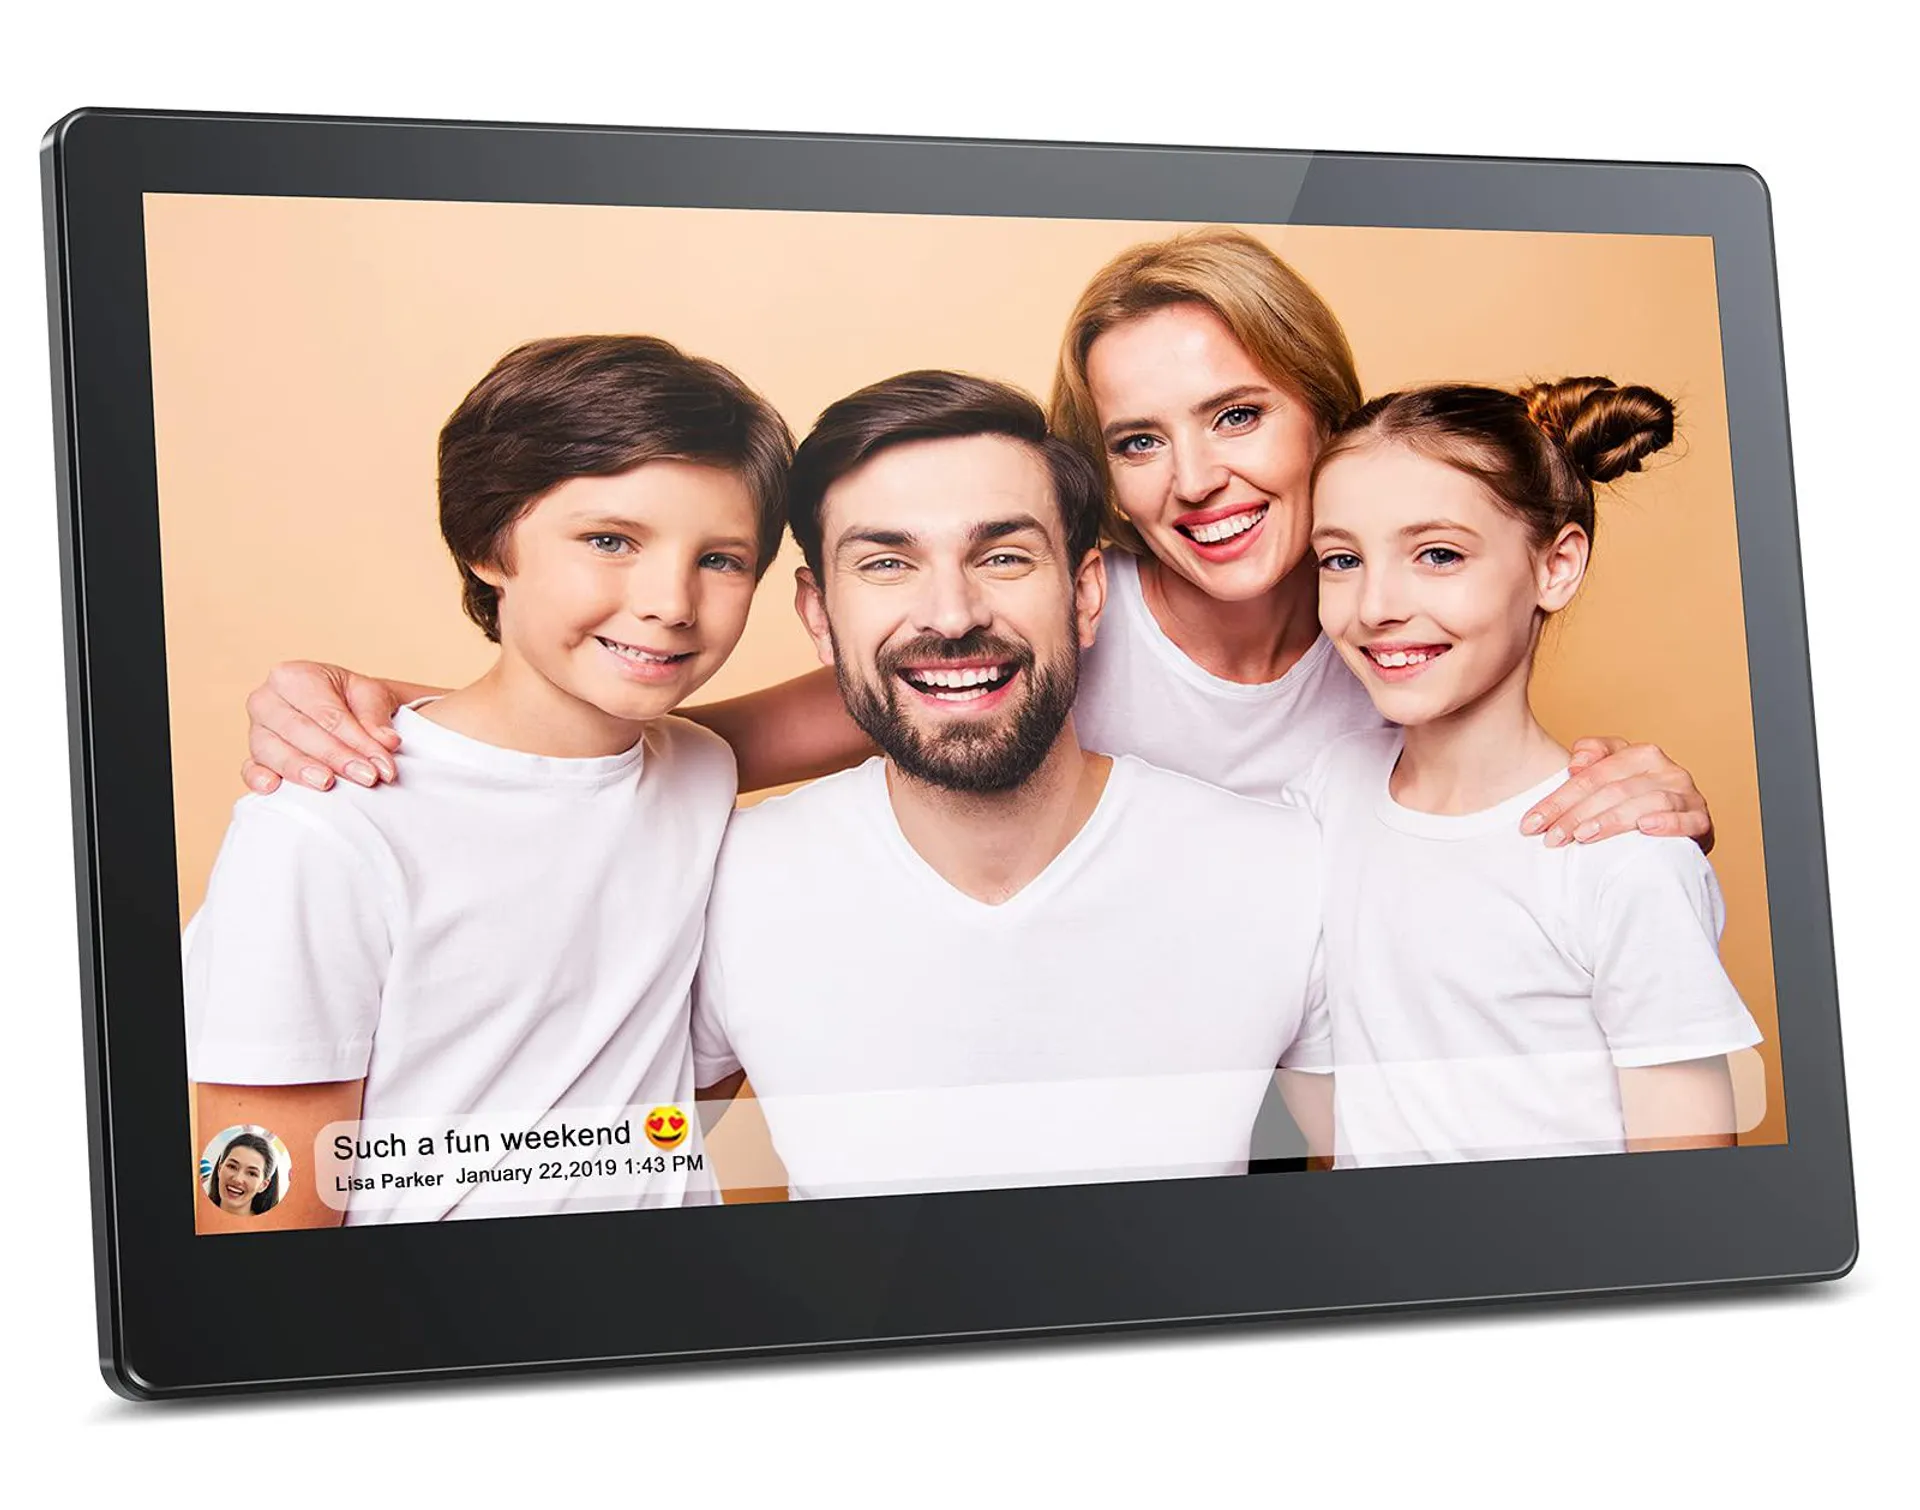 MARVUE FRAMEO 156 Inch FHD Digital Photo Frame WiFi, MARVUE Vision 15 Smart WiFi Electronic Digital Picture Frame Large Touch Screen&16